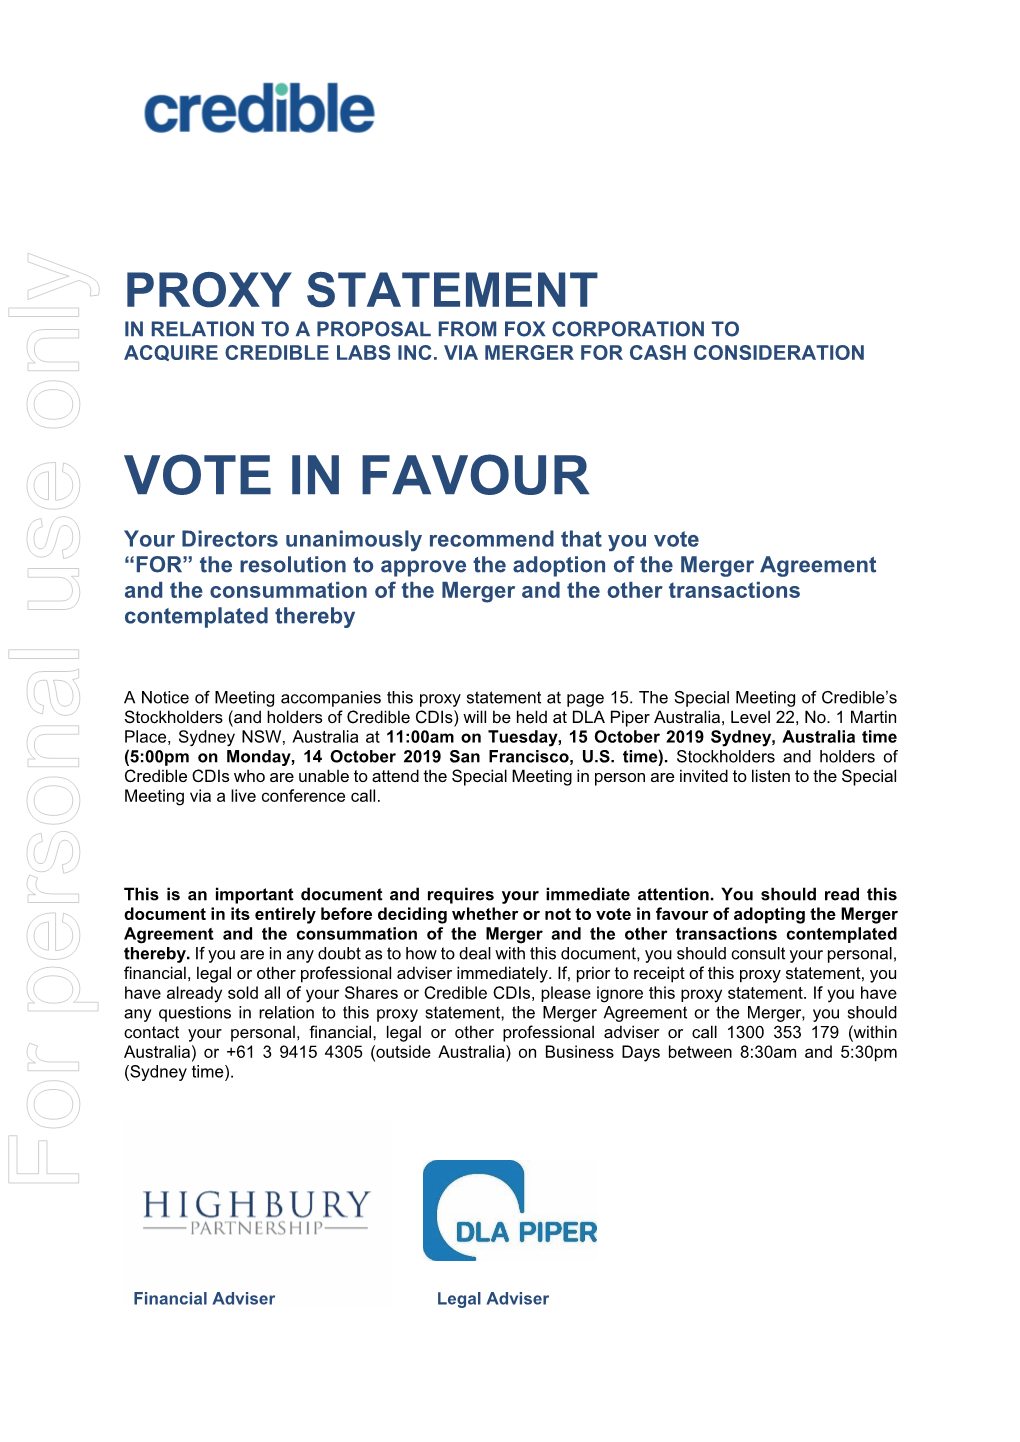 Proxy Statement in Relation to a Proposal from Fox Corporation to Acquire Credible Labs Inc